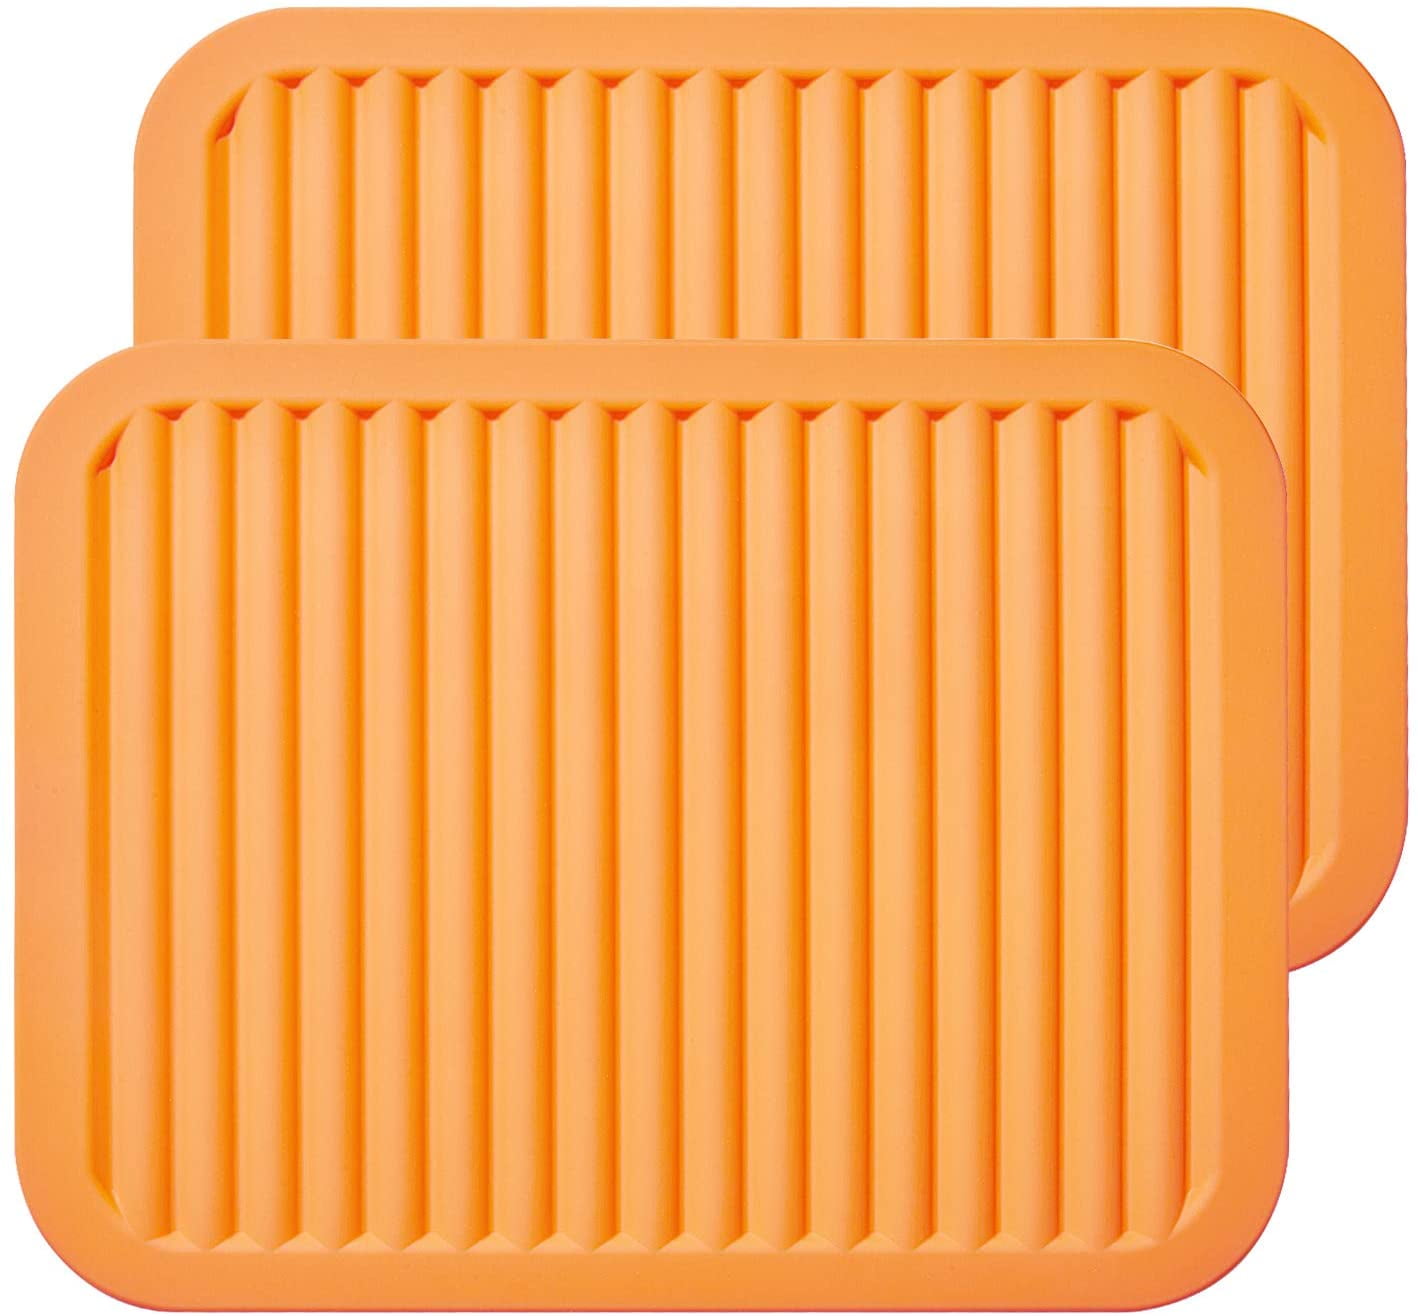 Spoon Rest 2 Set ME.FAN Silicone Trivets 9 x 12 Silicone Potholder Hot Pads Large Coasters Orange Kitchen Table Mat Silicone Pot Holders